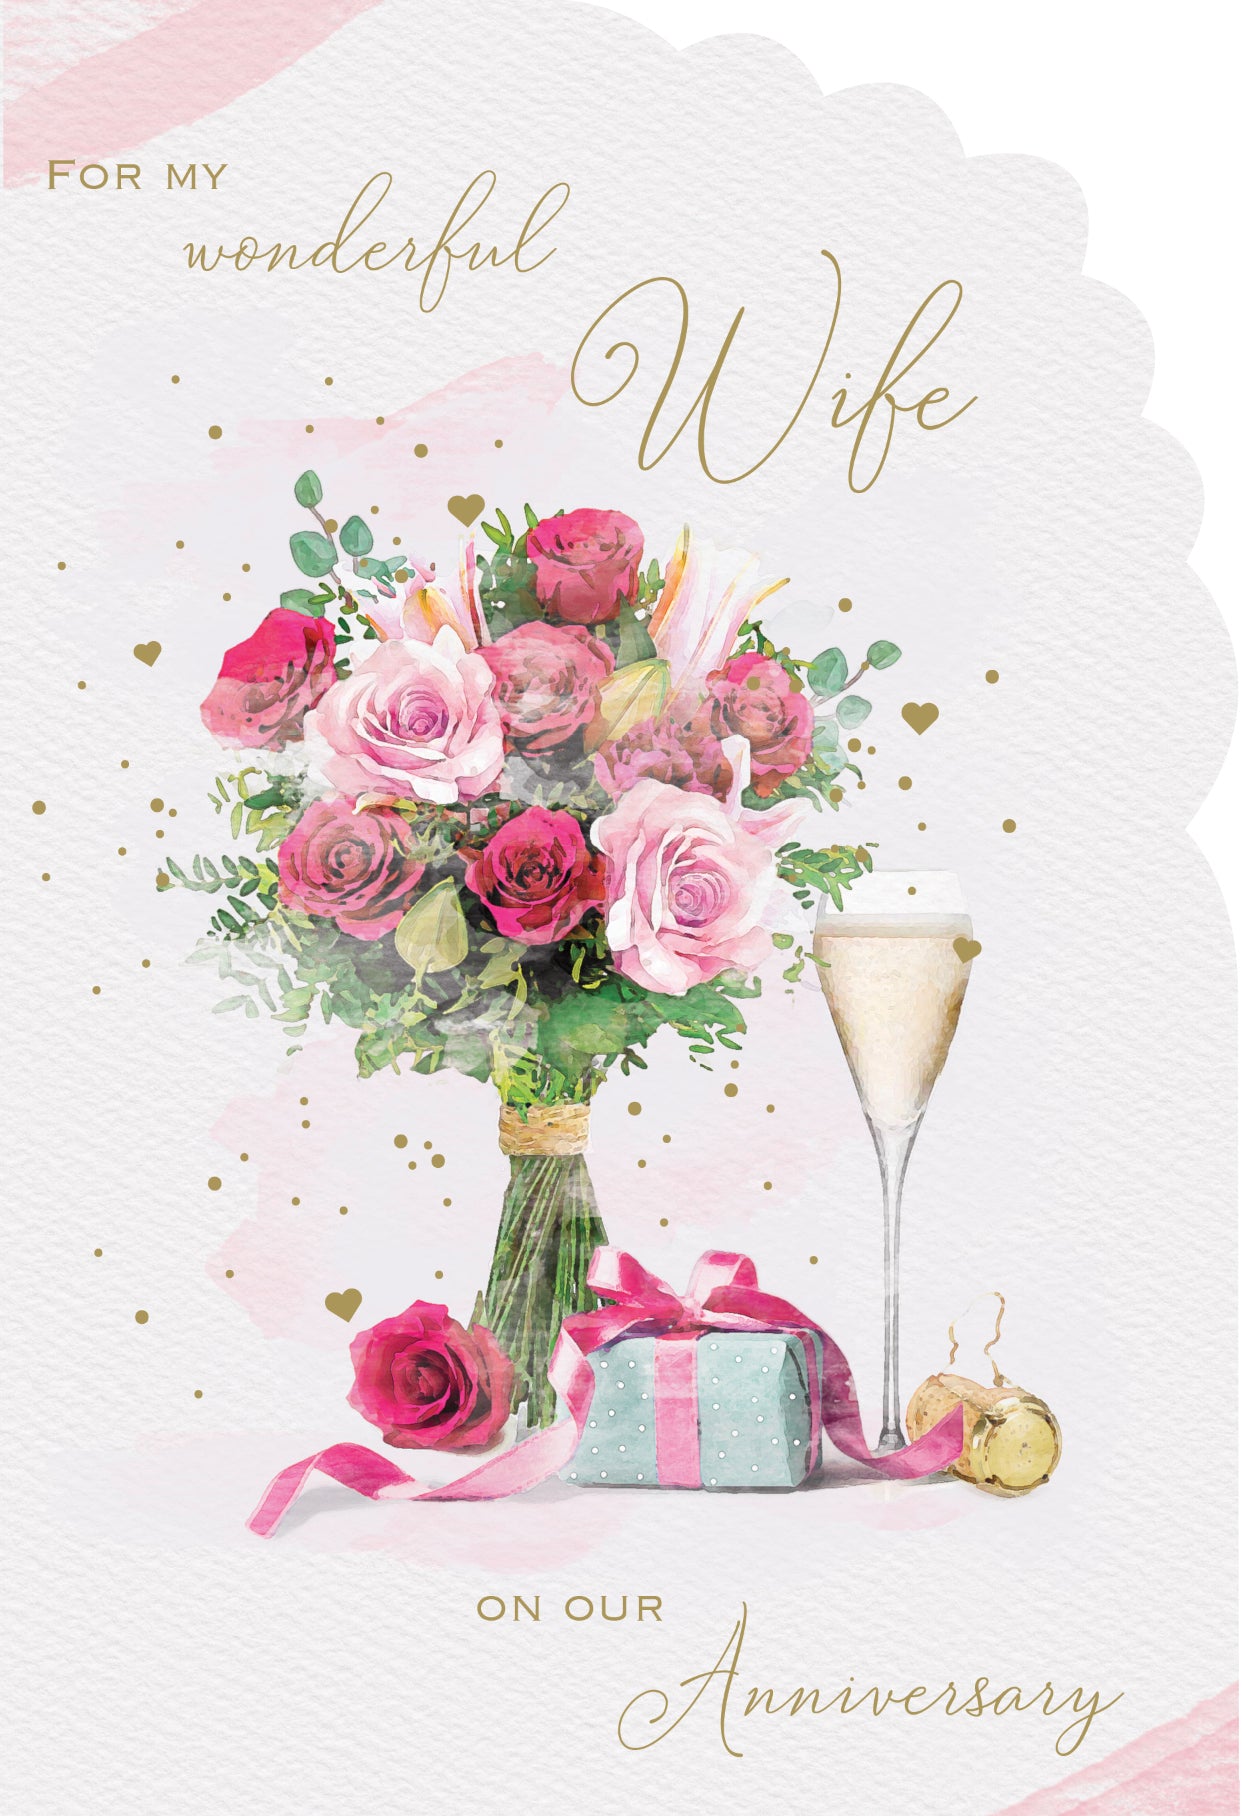 Wife anniversary card - flowers and champagne